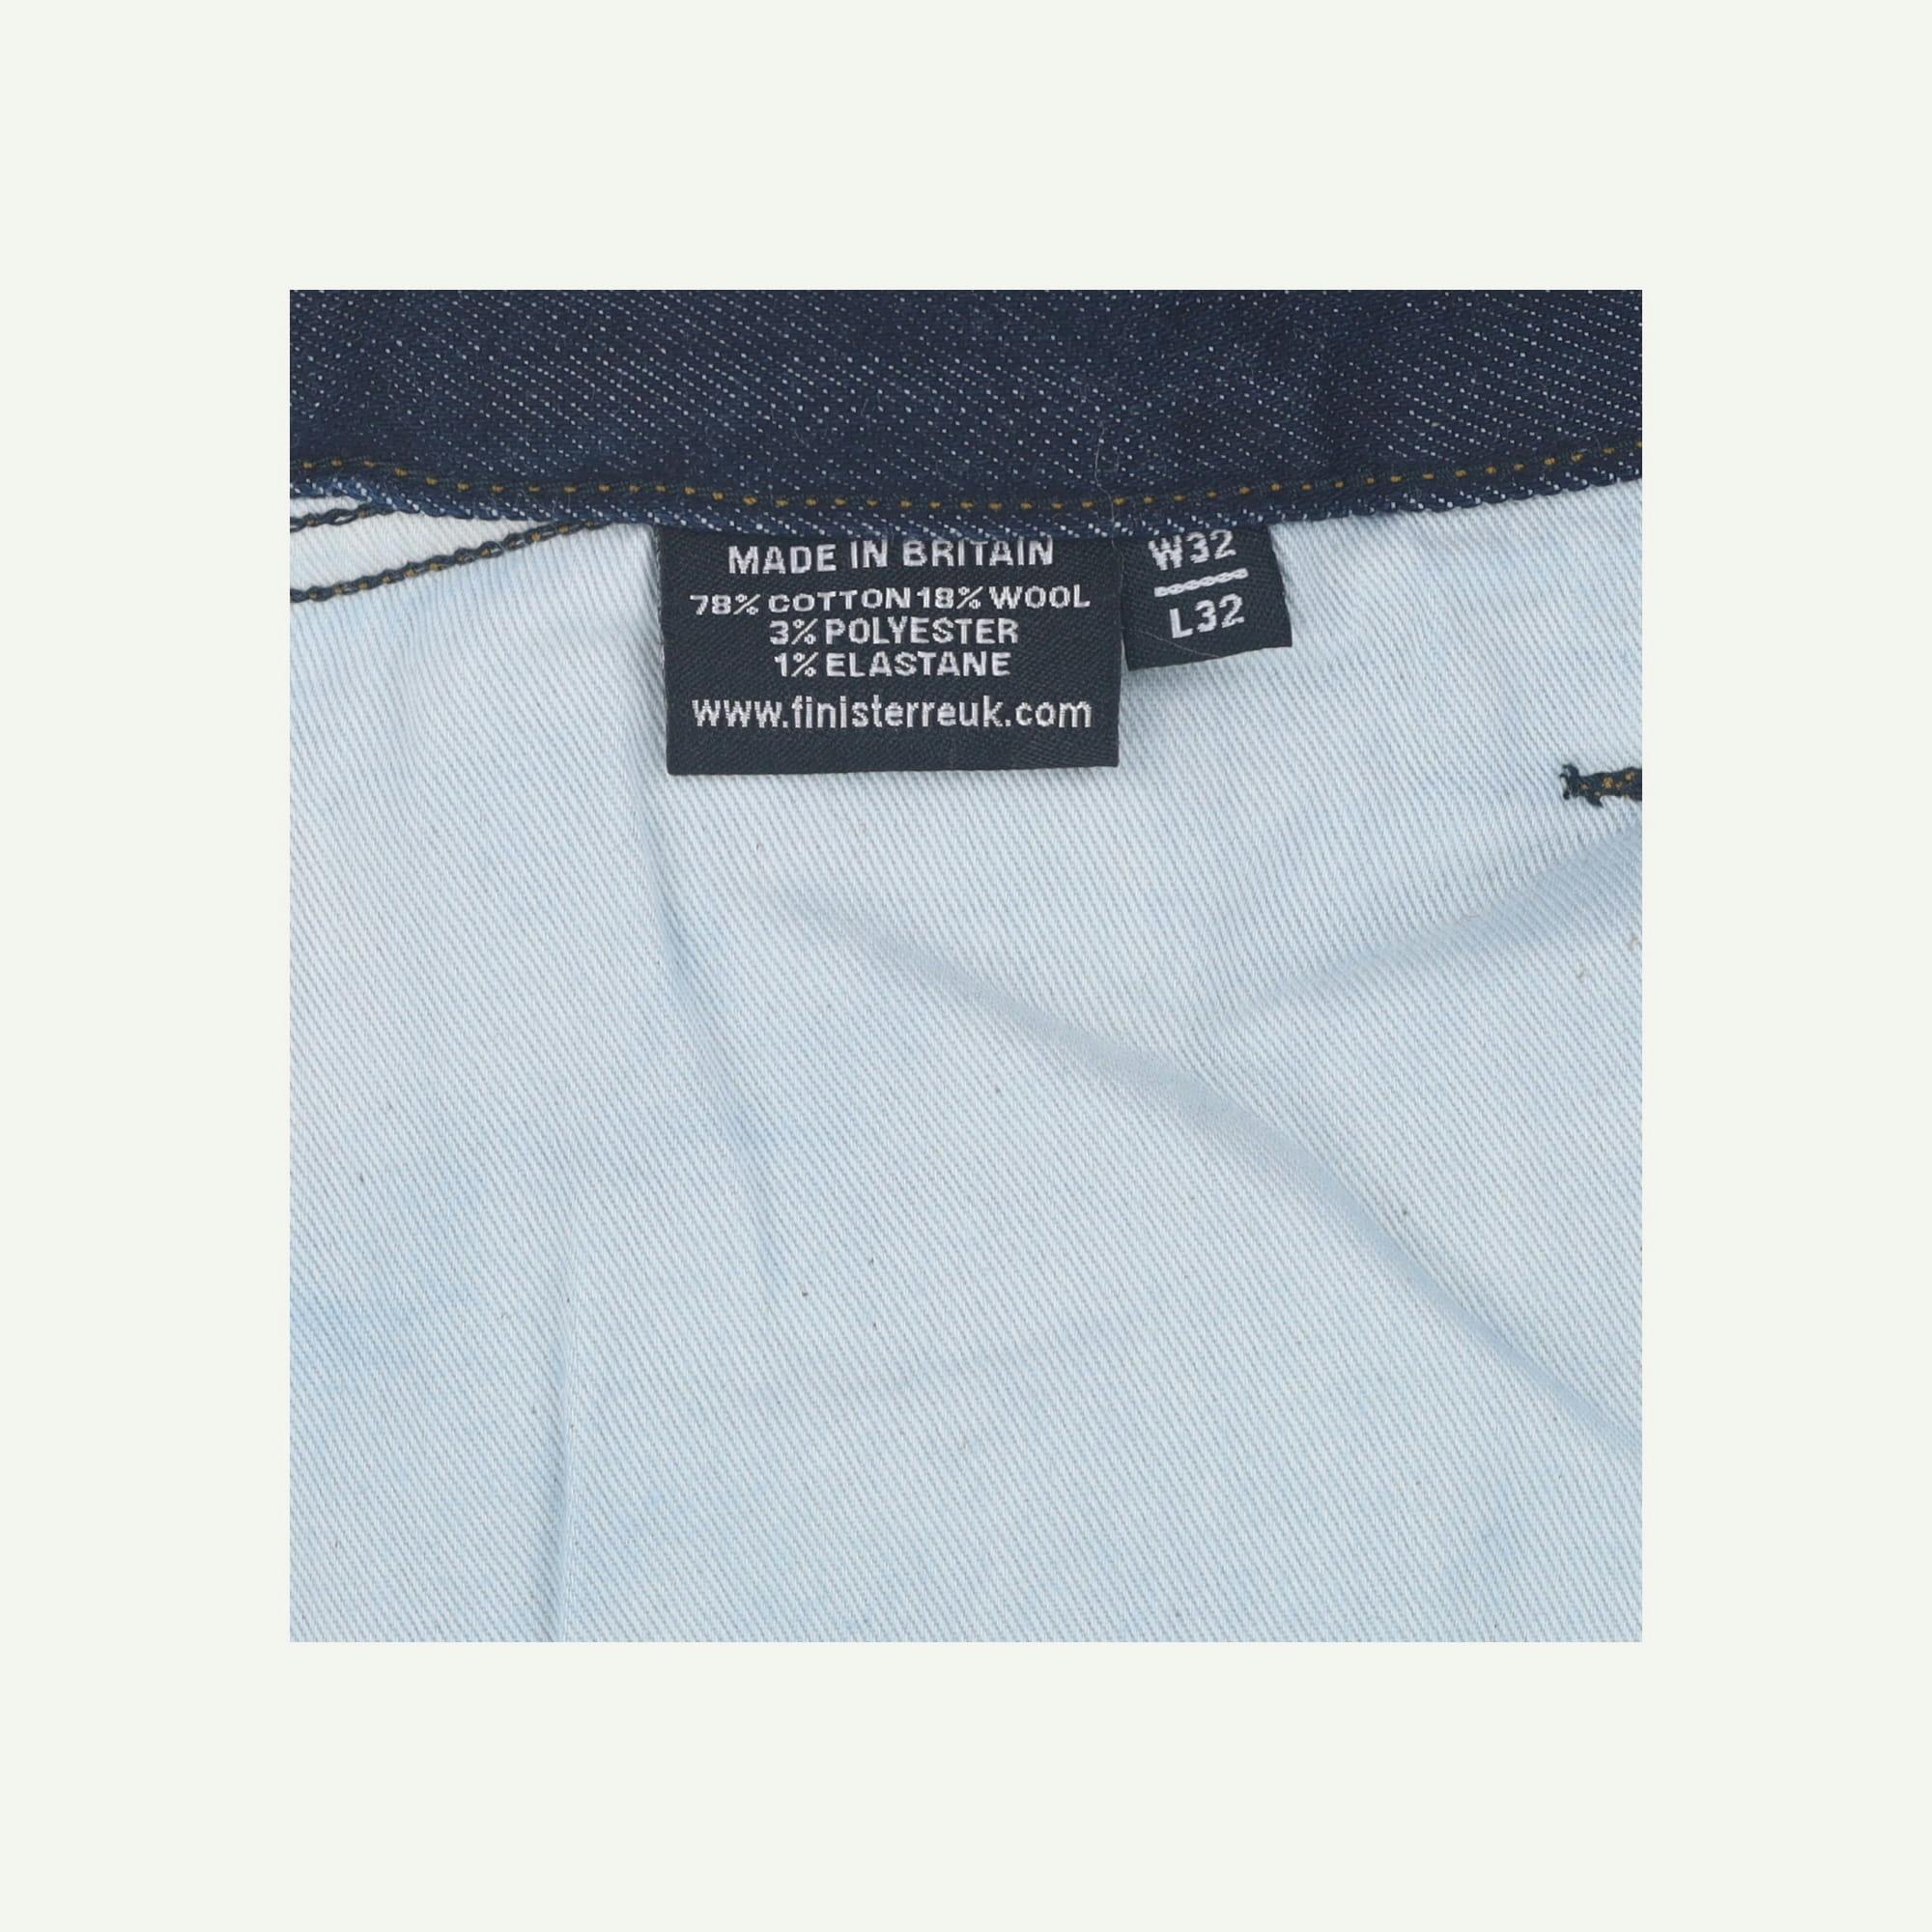 Finisterre Brand new Navy Jeans